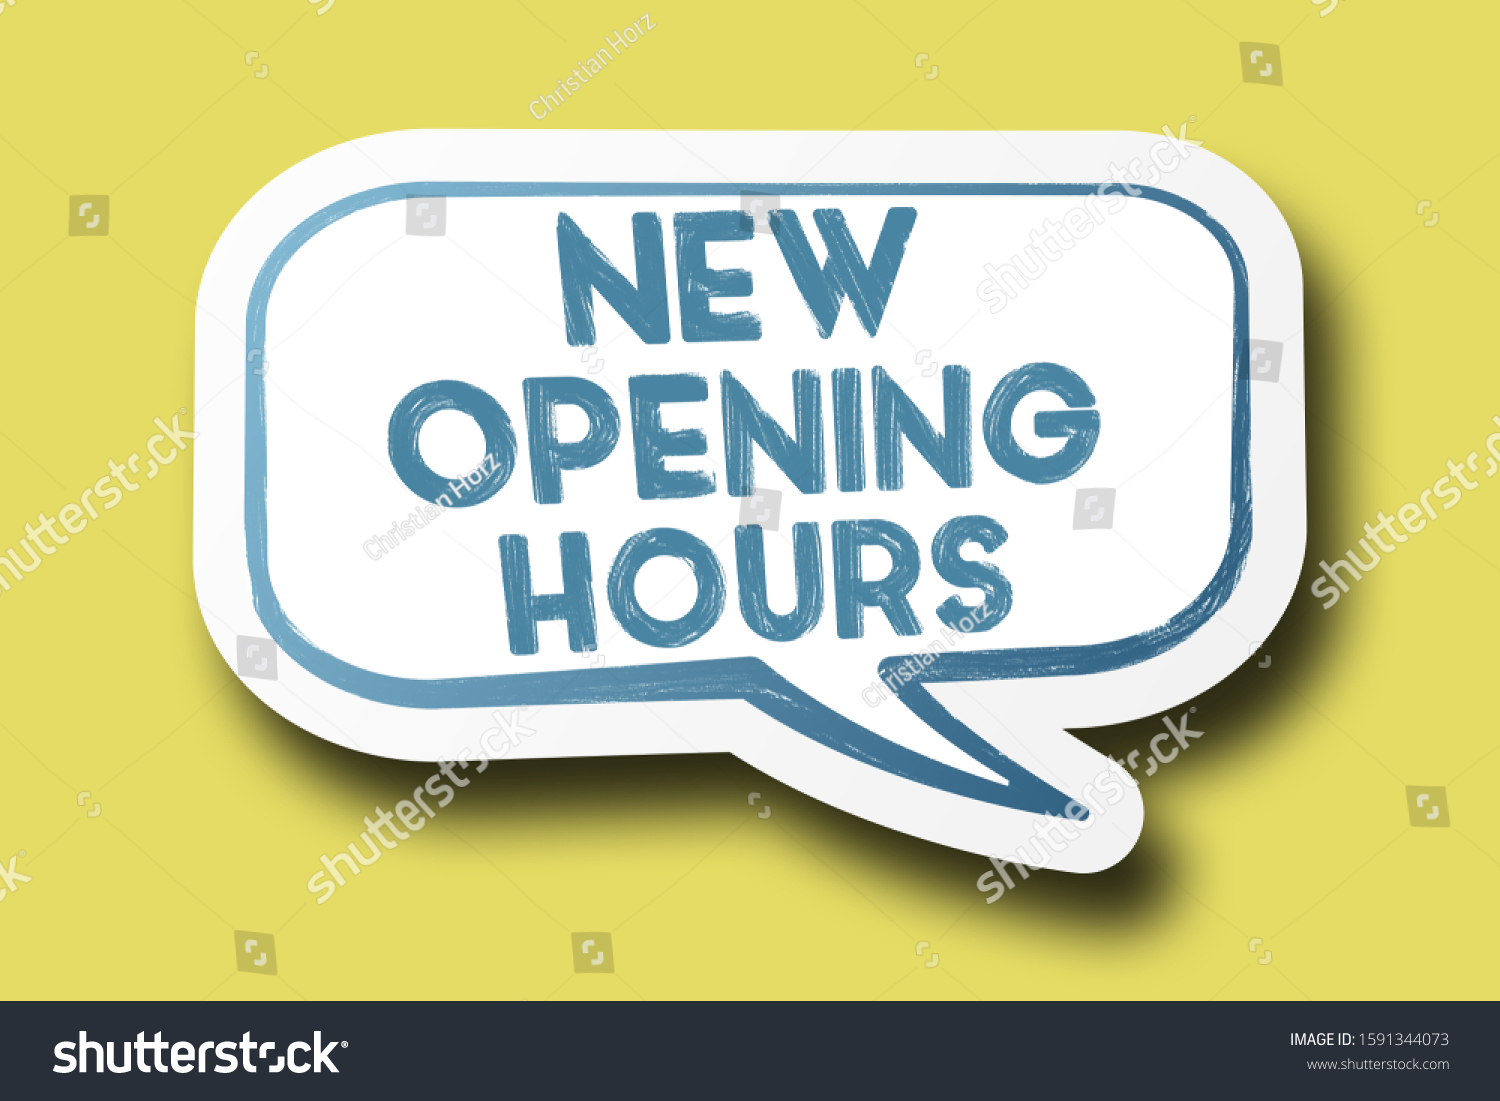 text NEW OPENING HOURS on speech bubble against bright yellow background #1591344073